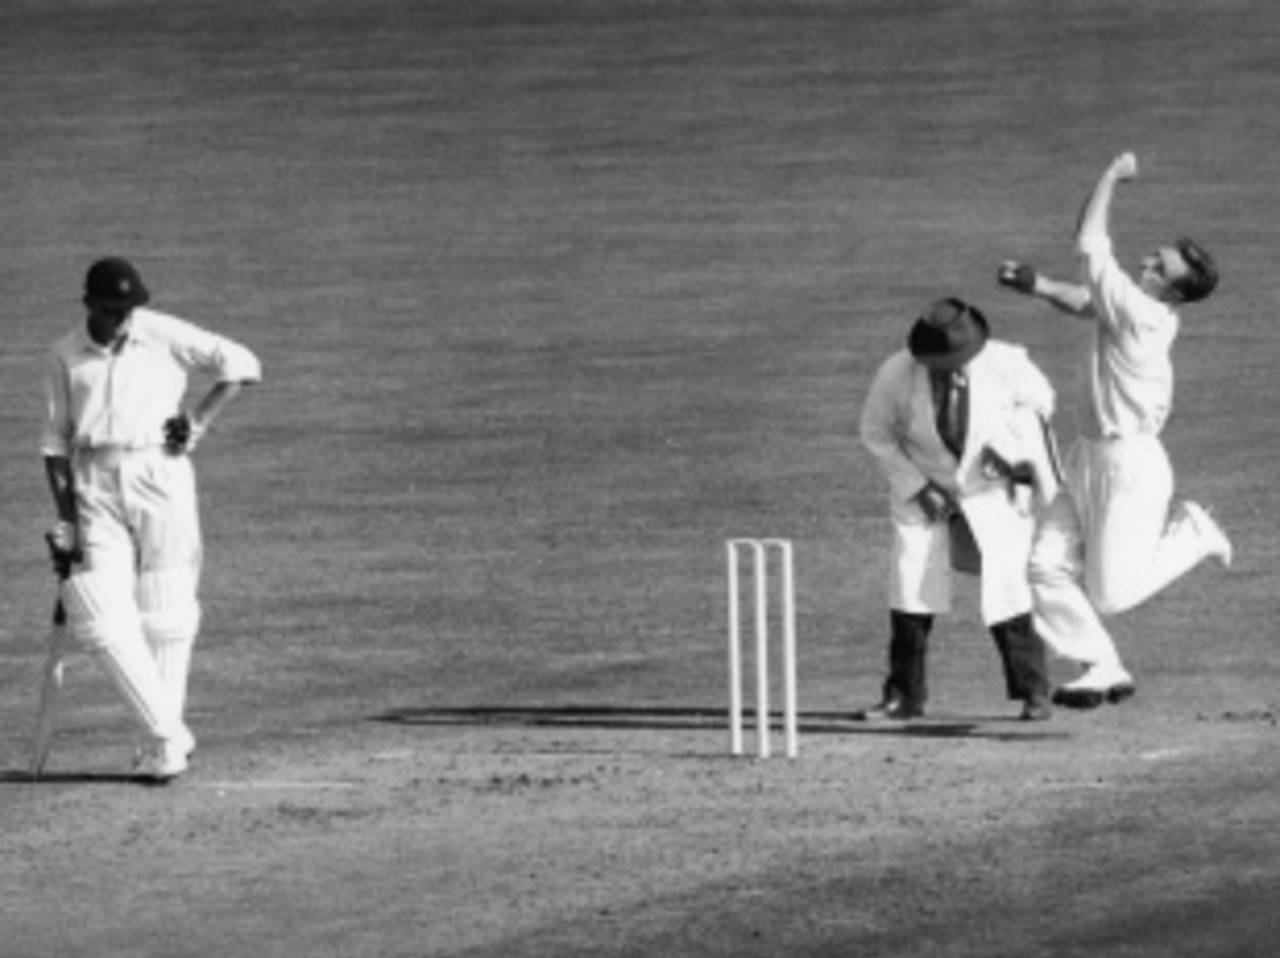 Ray Lindwall in his delivery stride, England v Australia, 5th Test, The Oval, 2nd day, August 17, 1953